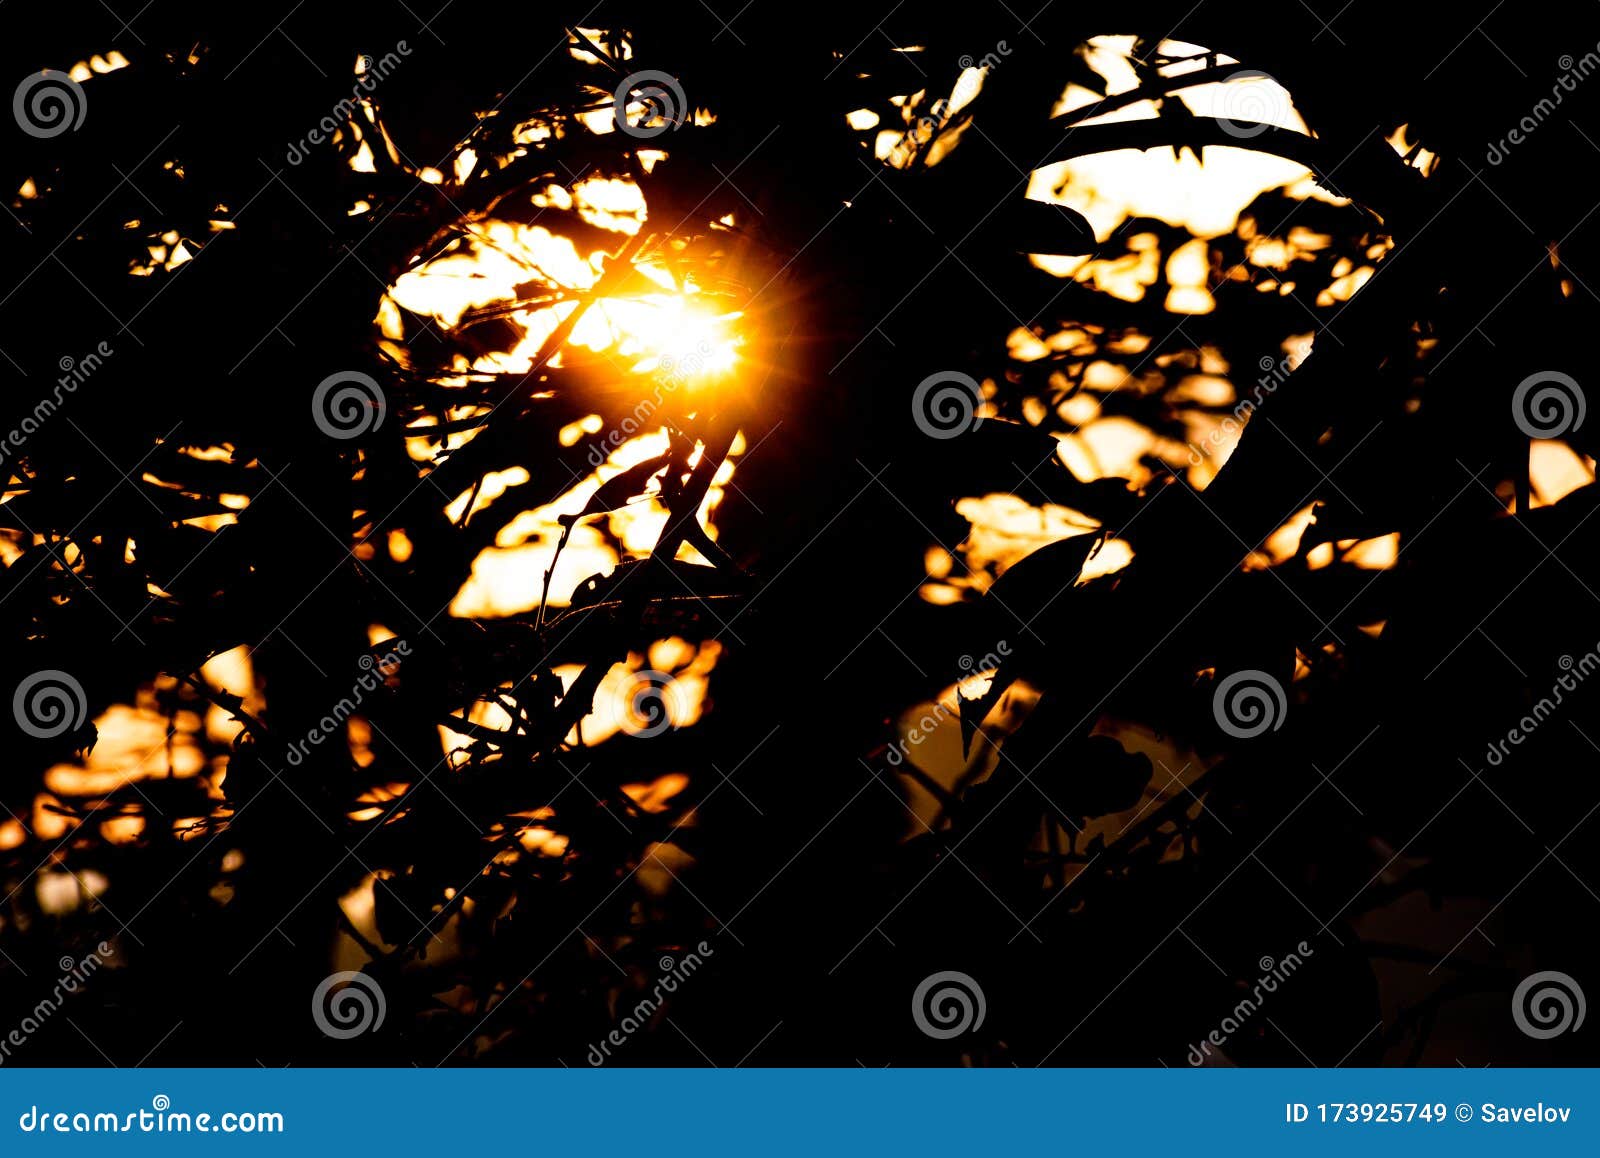 Sunset through the Branches of a Tree Stock Image - Image of beautiful